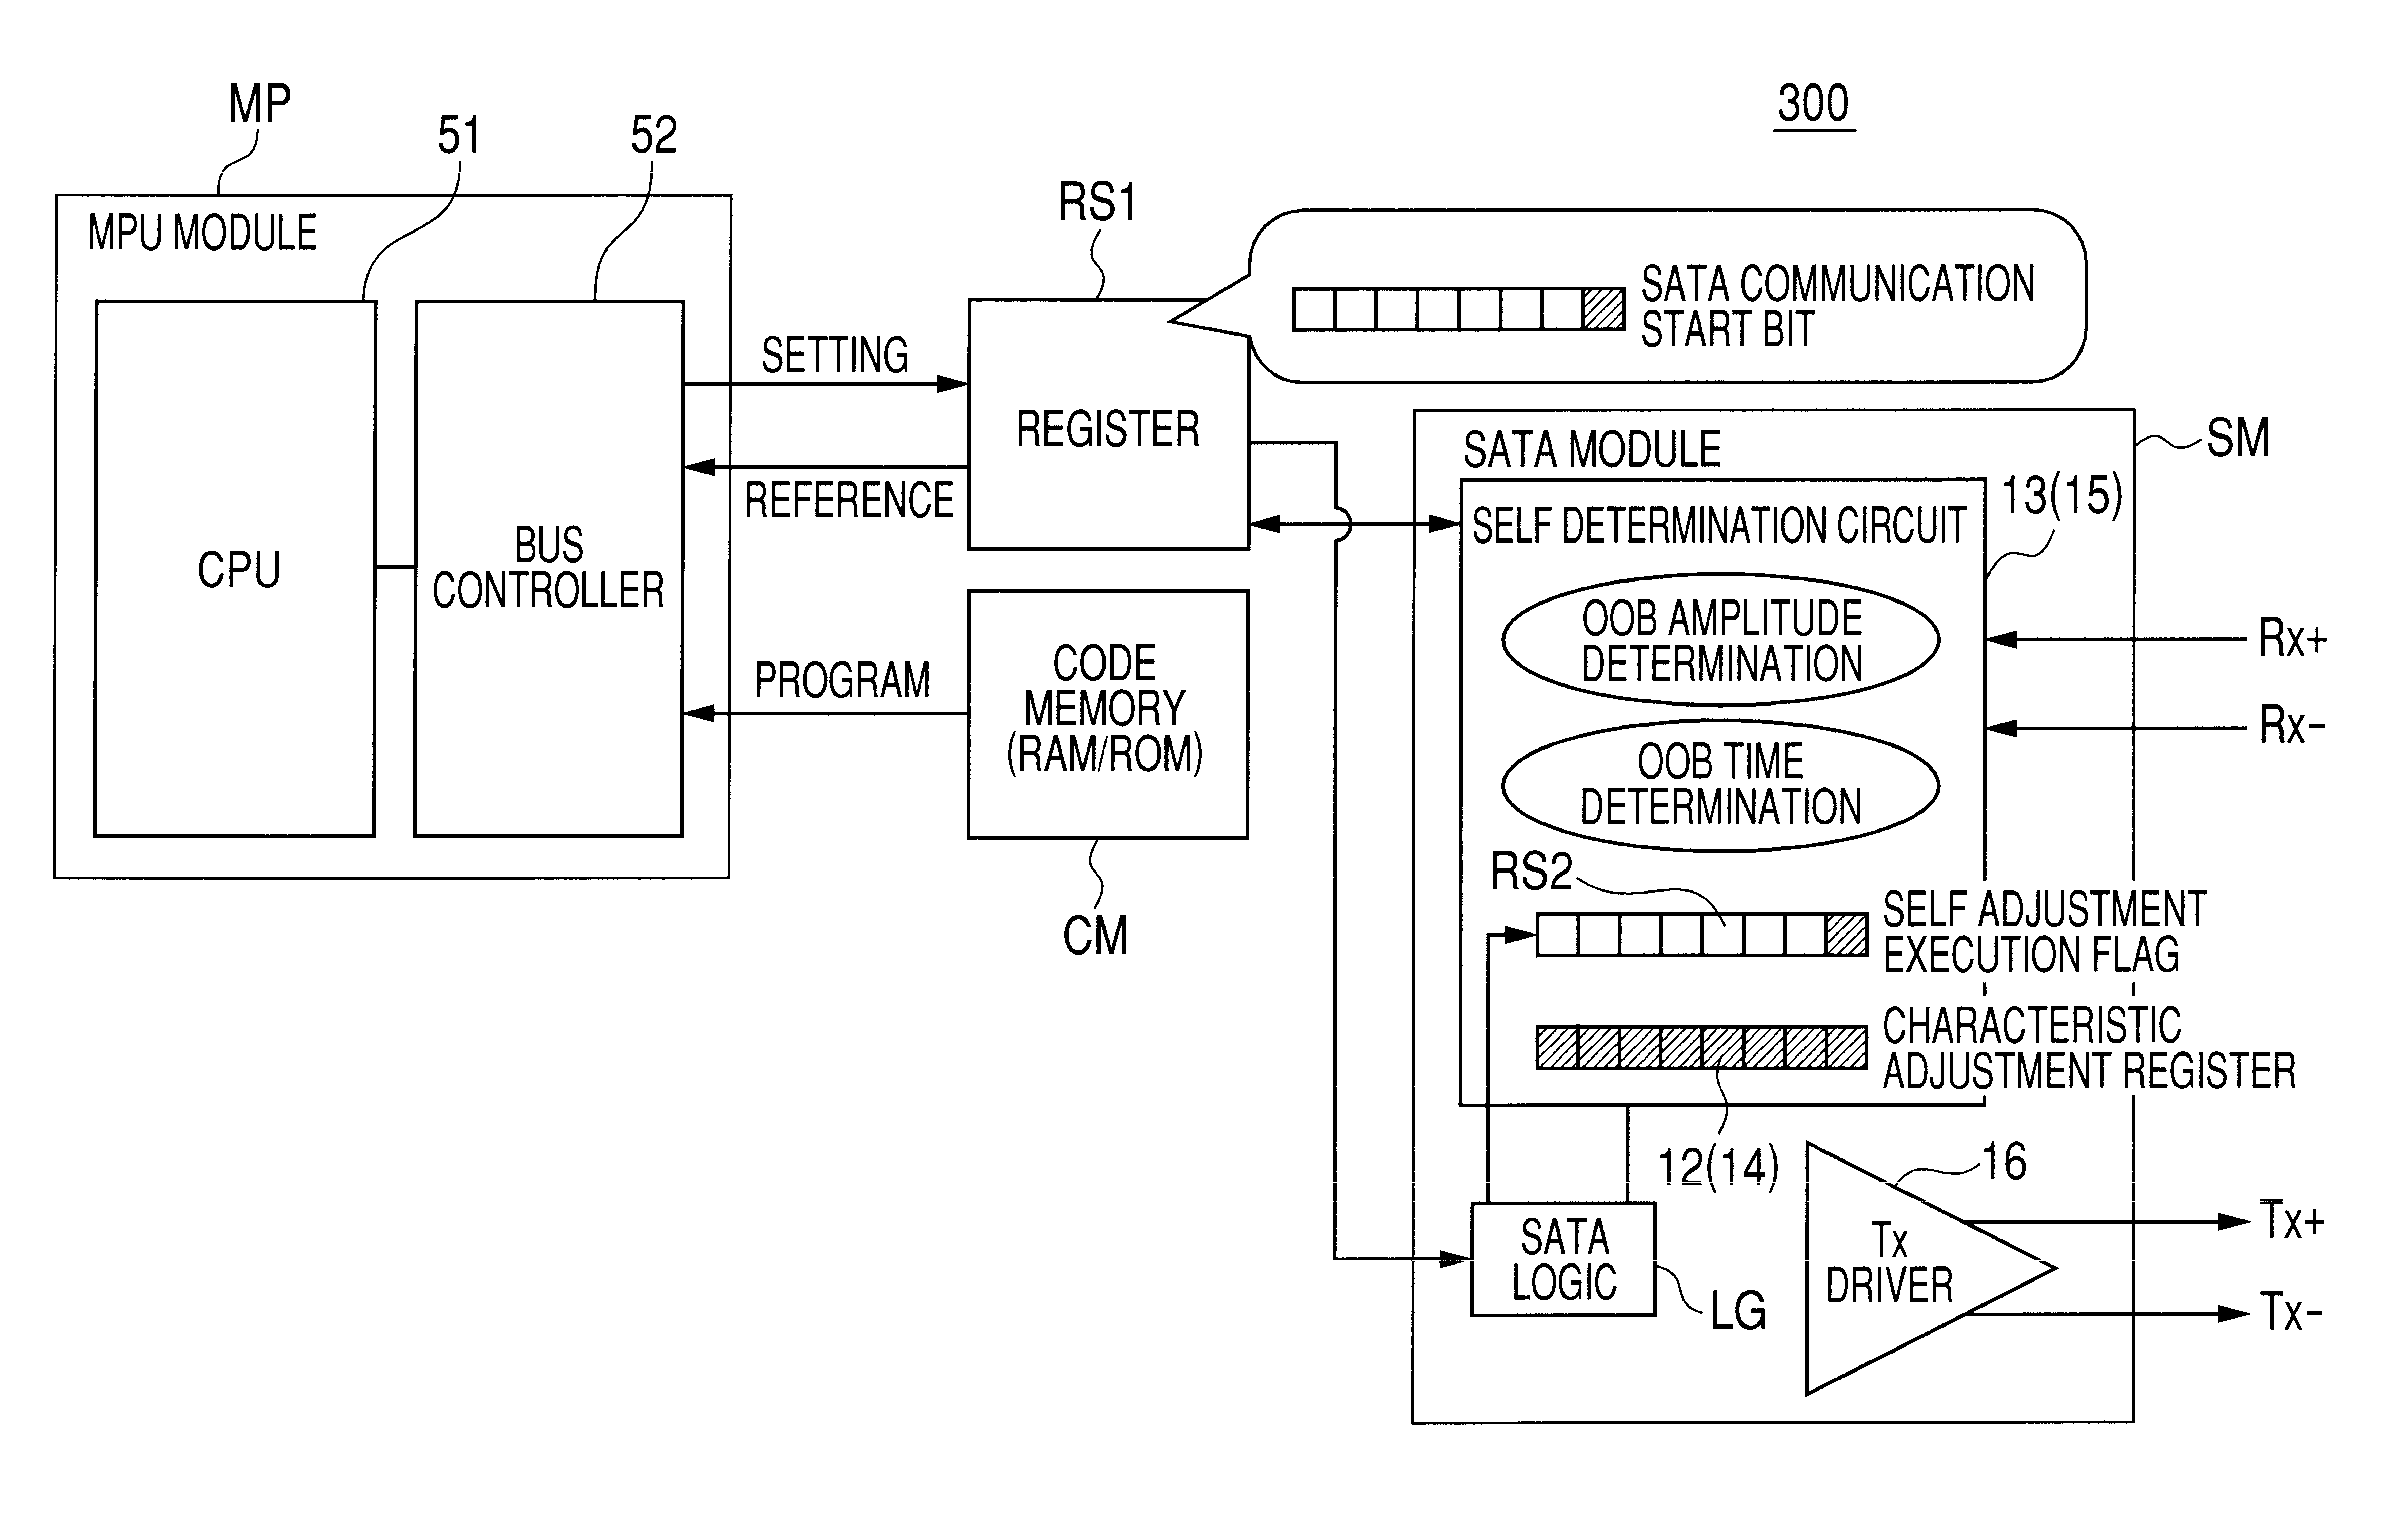 OOB (out of band) detection circuit and serial ATA system